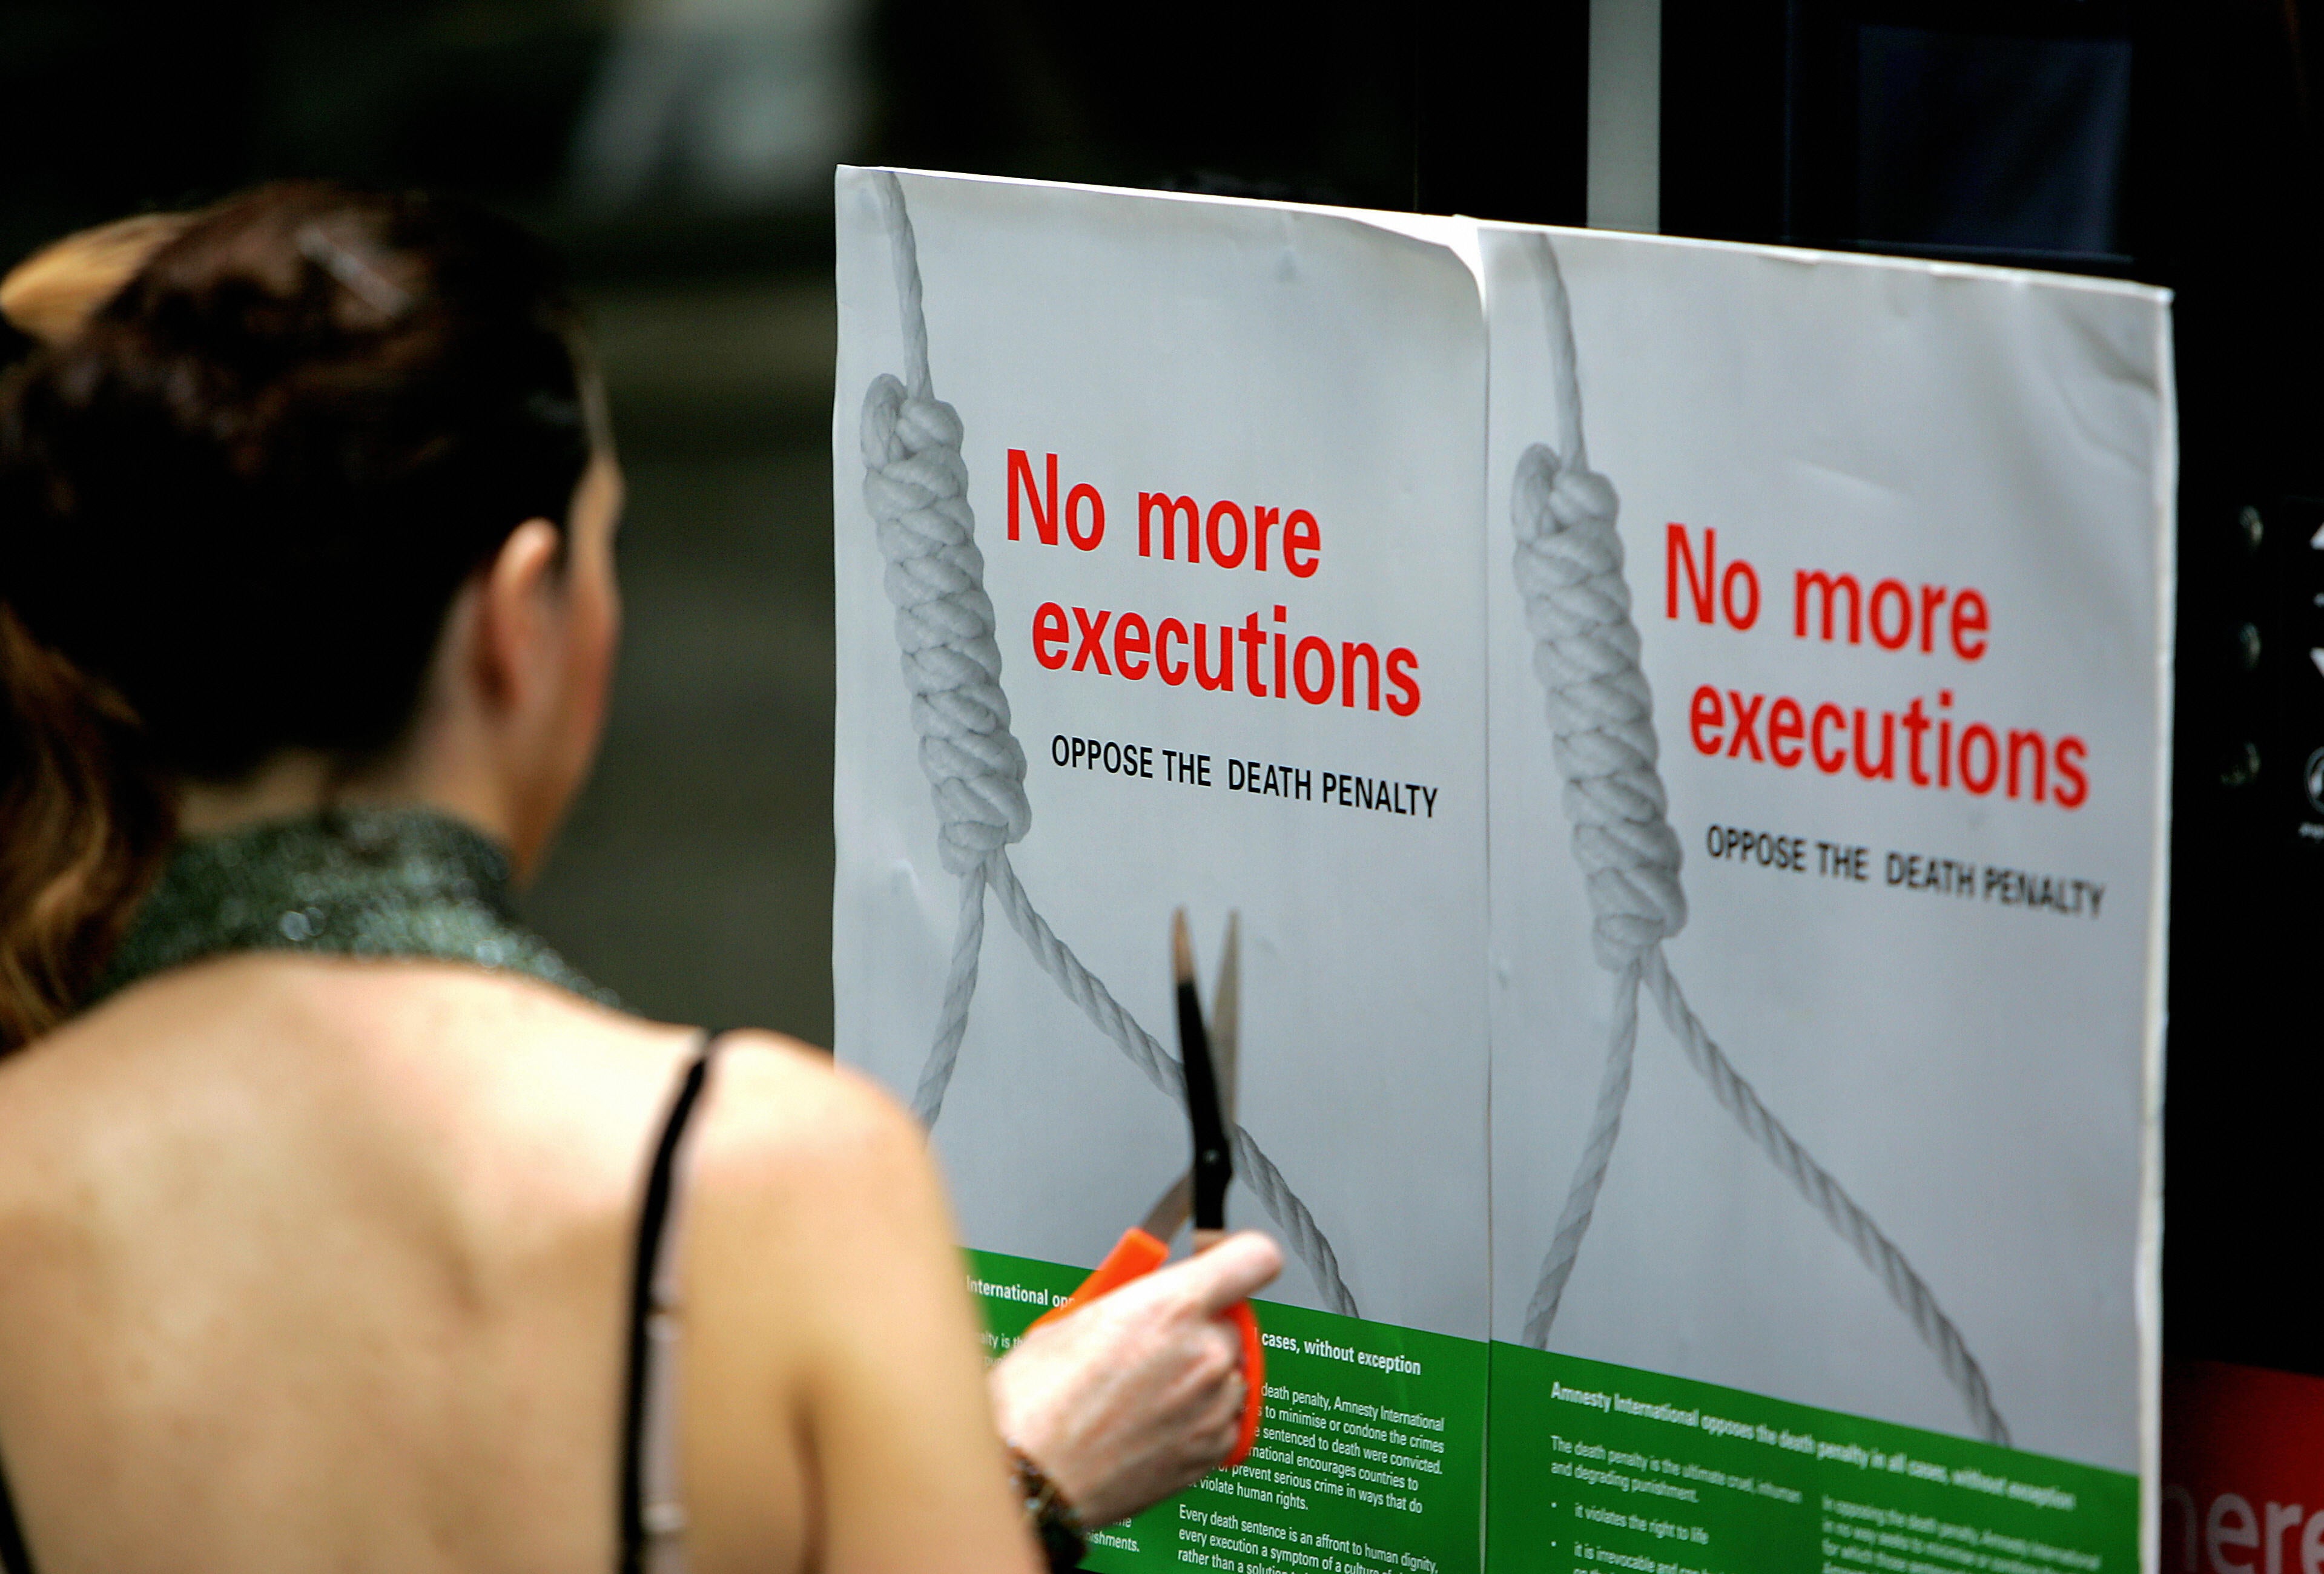 This is Singapore’s fifth such execution this year, and the 16th execution for drug offences since the country resumed hangings in March last year after observing a two-year hiatus during the Covid pandemic